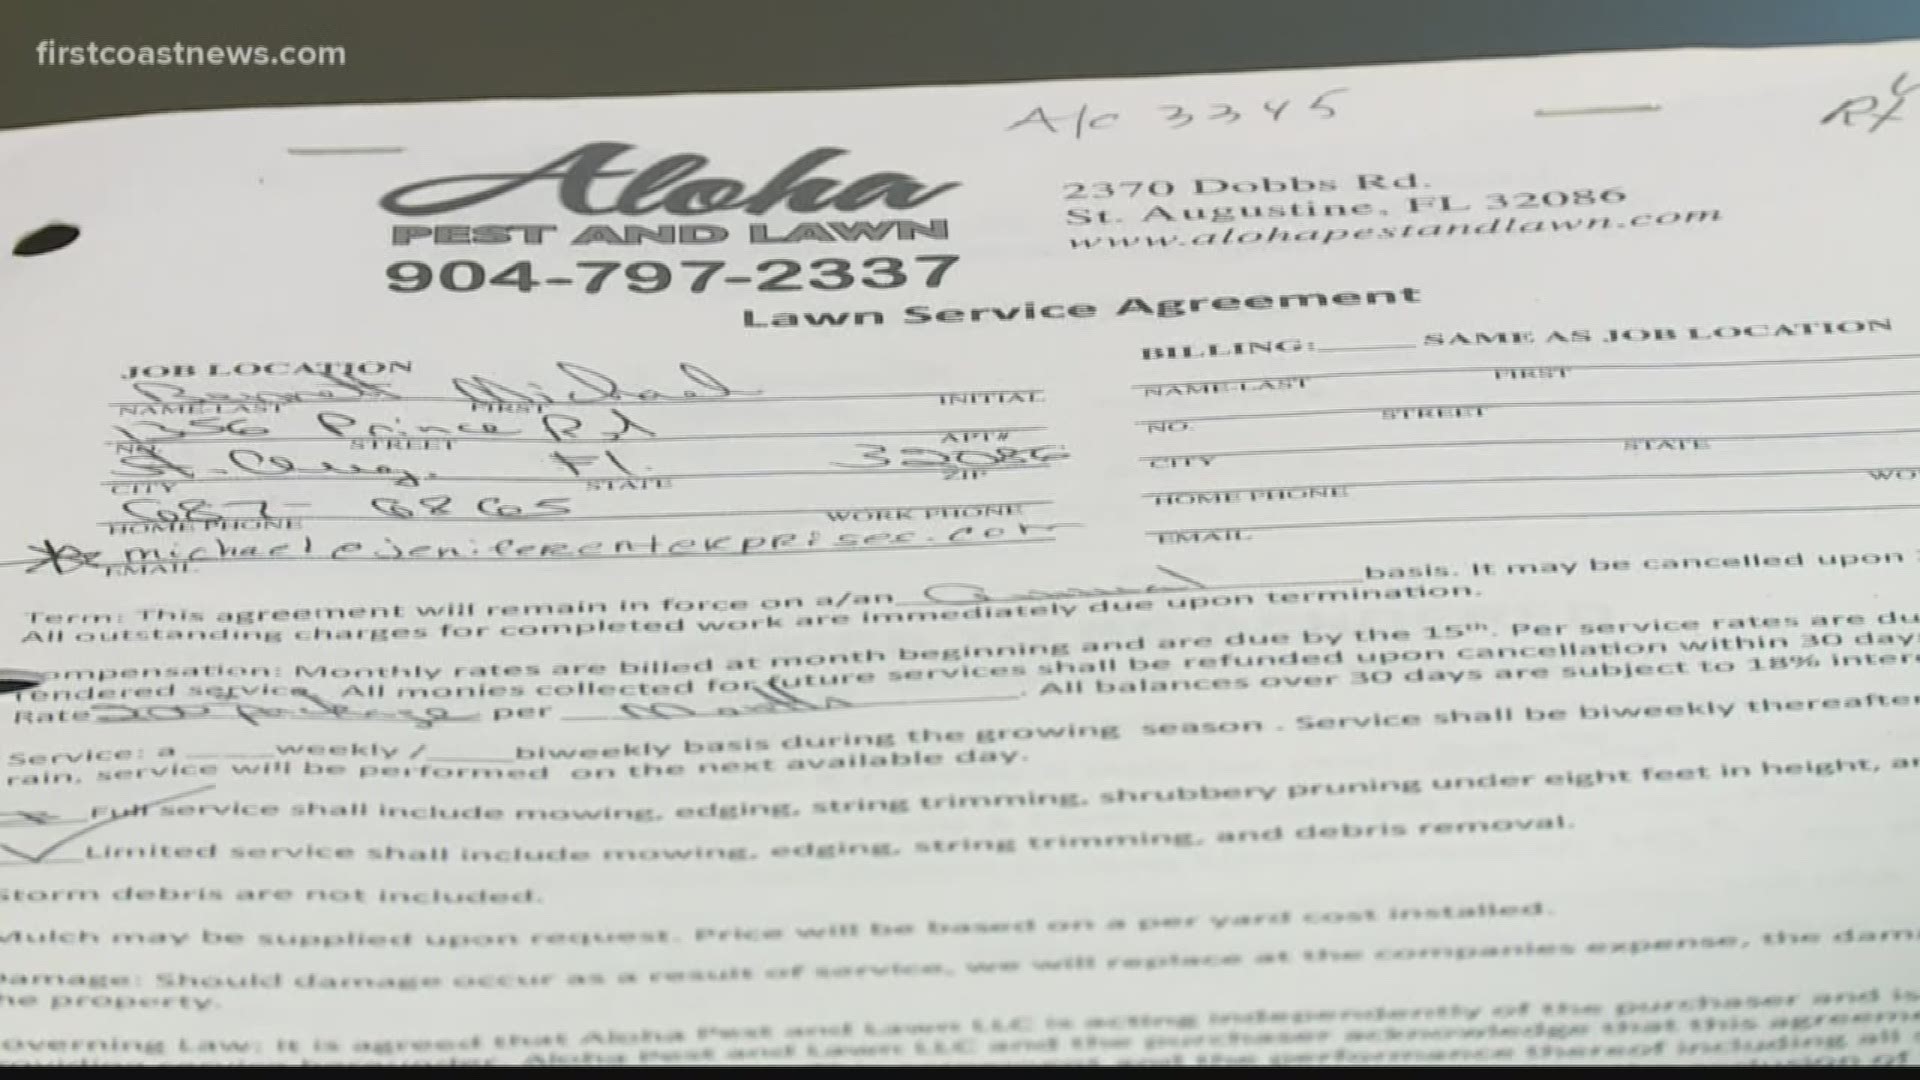 The lawn service owner said that he was transparent and believes this is a case where the customer's expectations are not aligned with the terms of the service agreement.